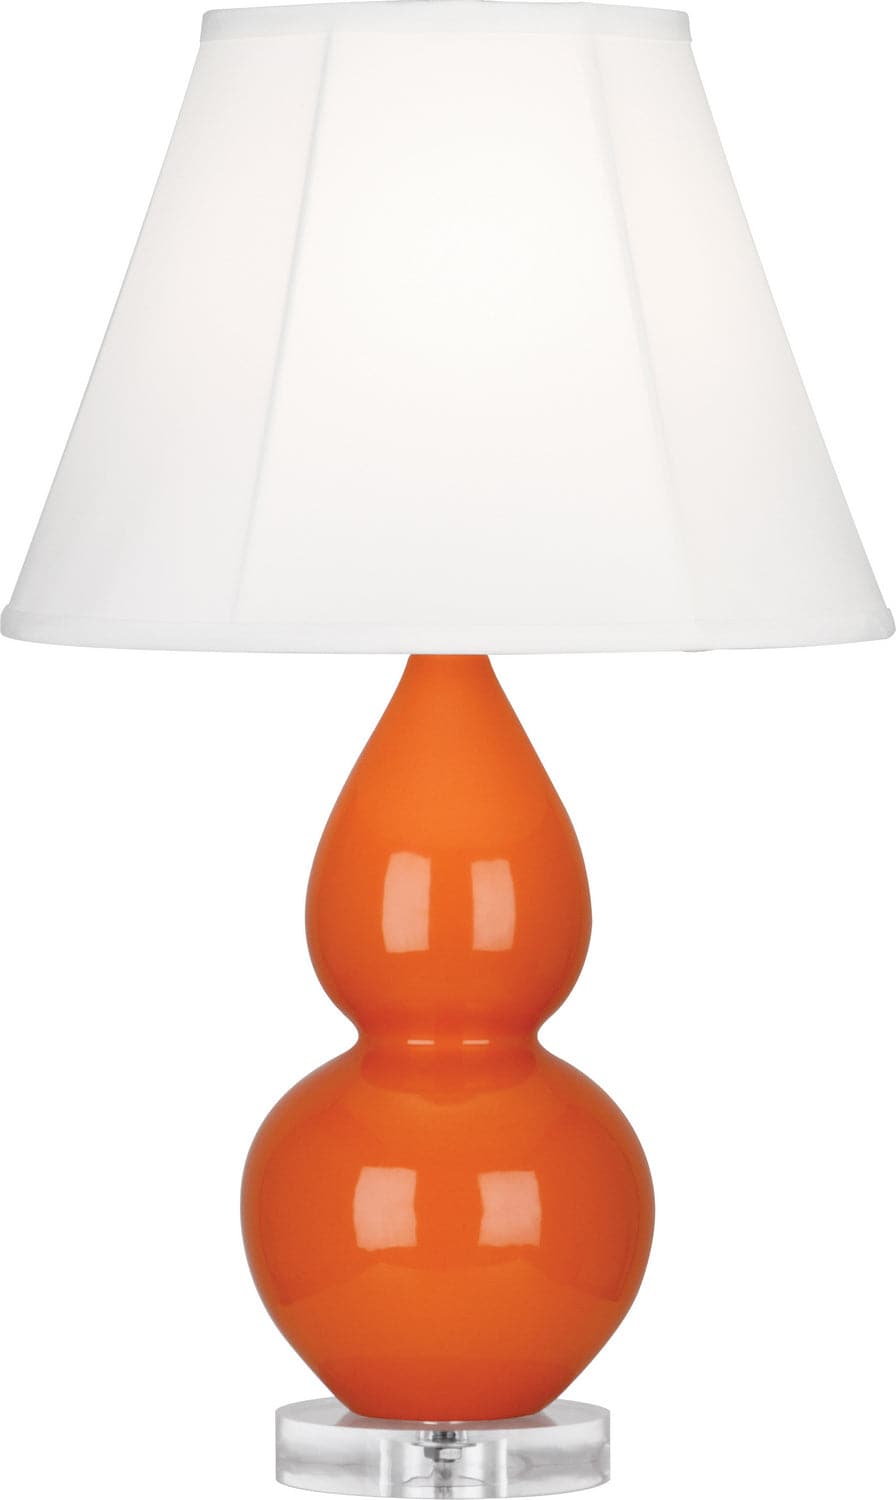 Robert Abbey - A695 - One Light Accent Lamp - Small Double Gourd - Pumpkin Glazed w/Lucite Base